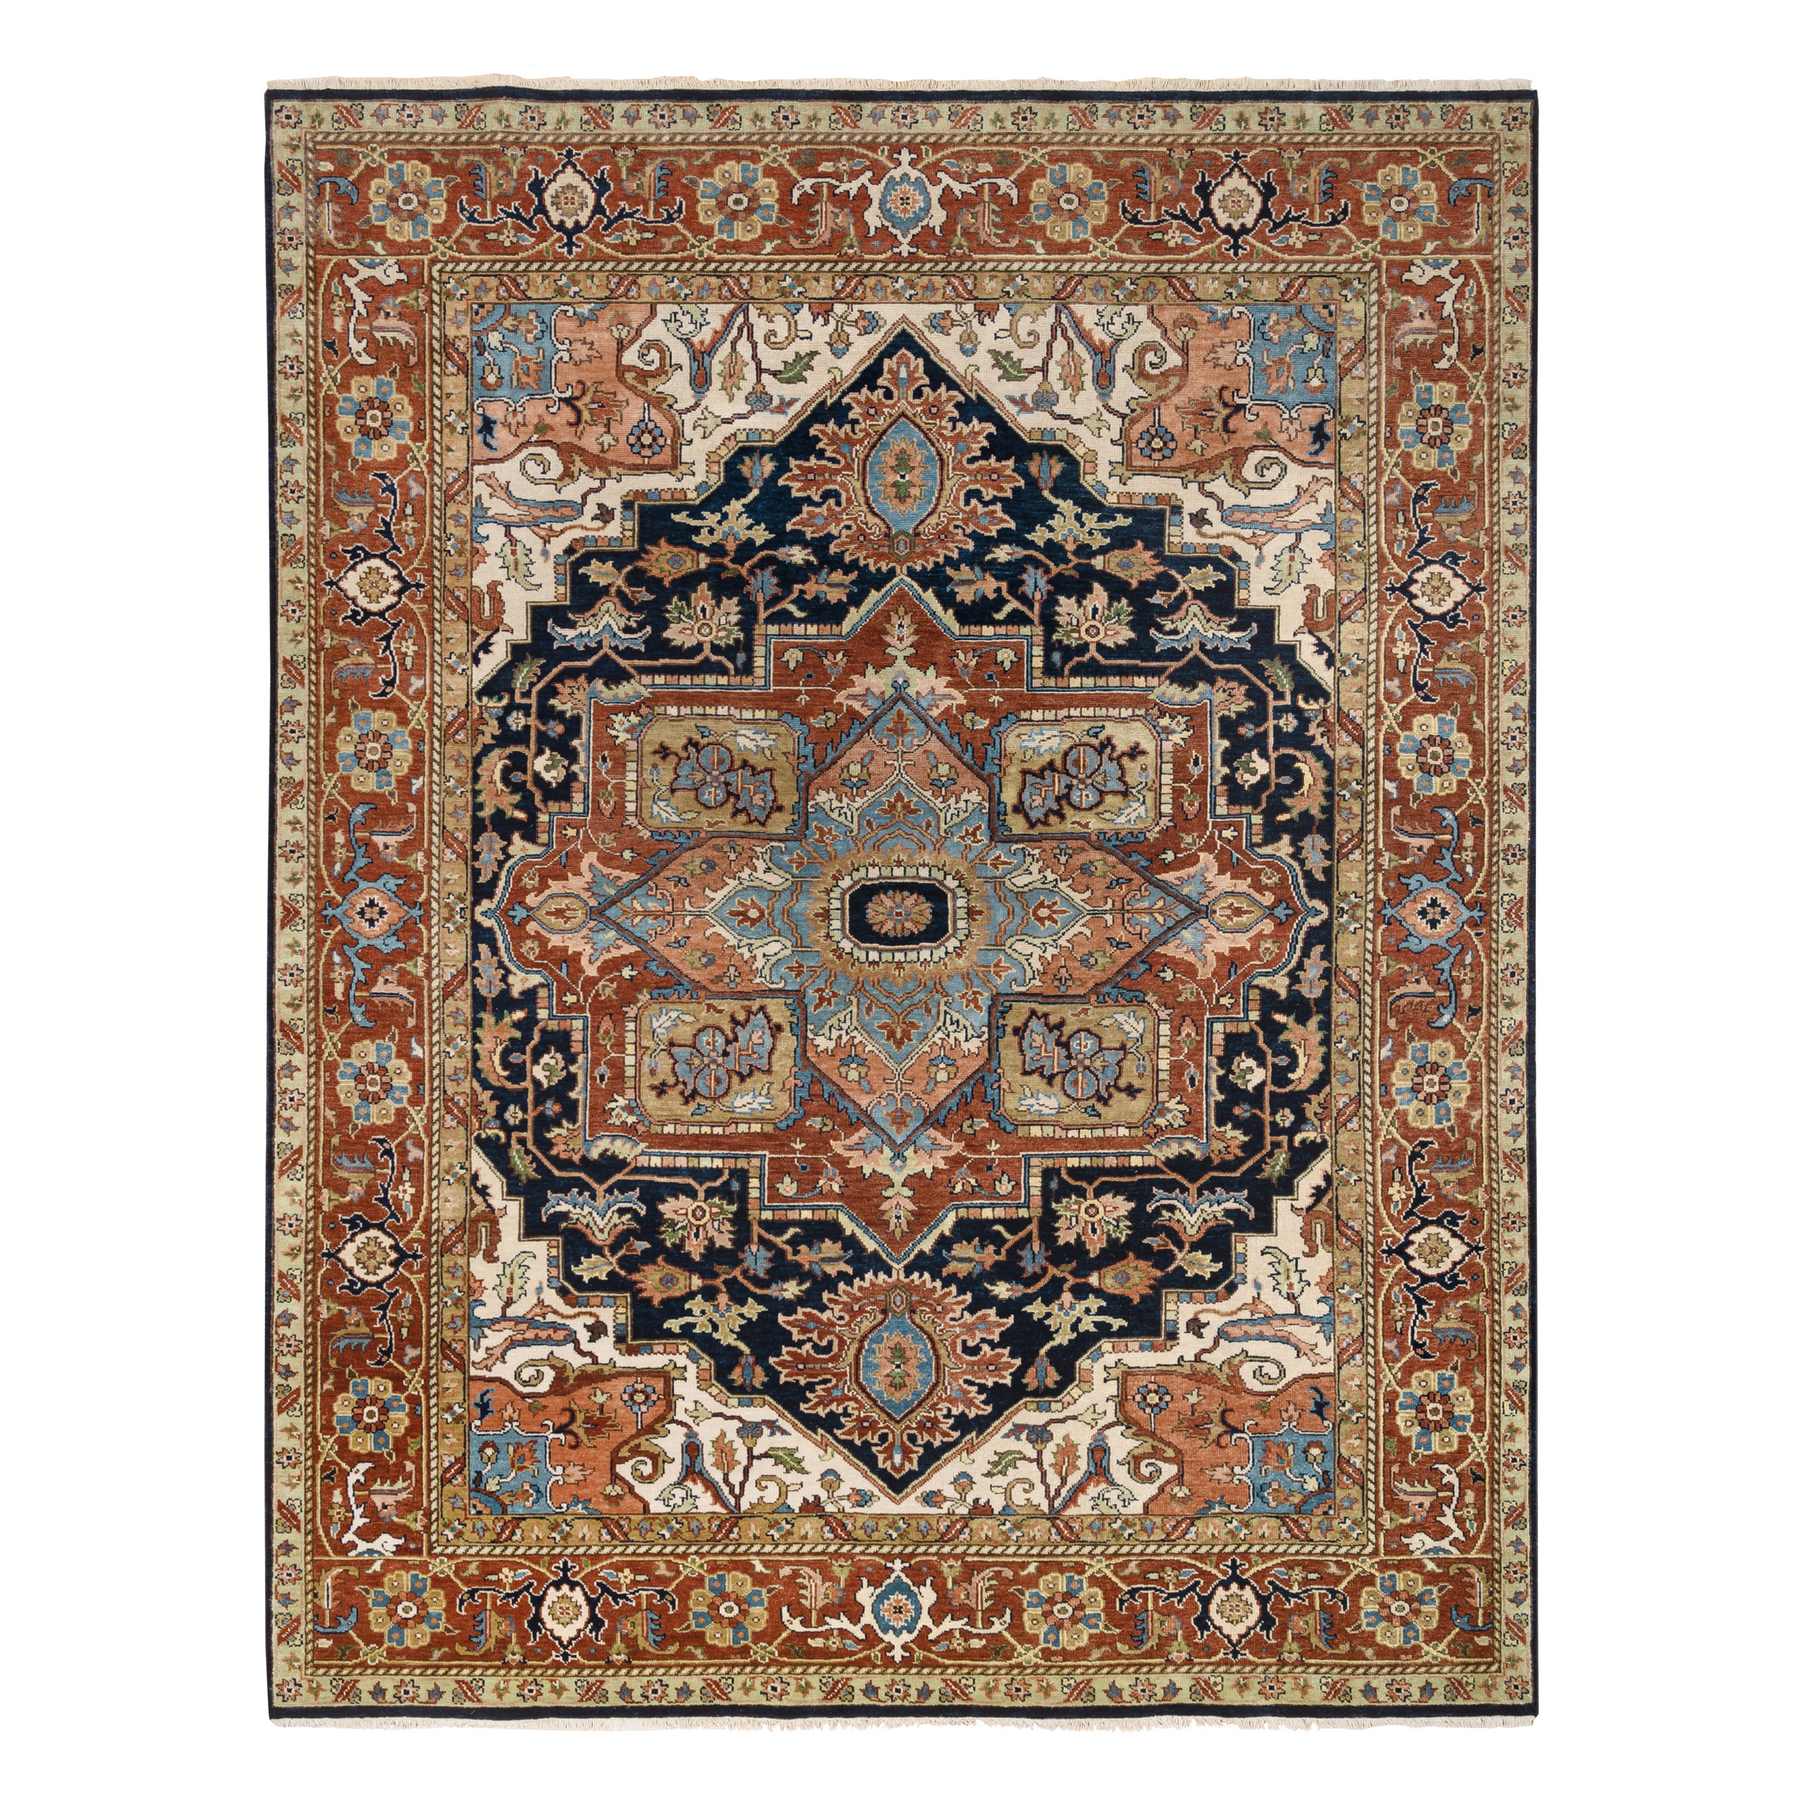 8'x9'10" Navy and Rust, Heriz with Classic Geometric Medallion Design, Thick and Plush Pure Wool Hand Woven, Oriental Rug 